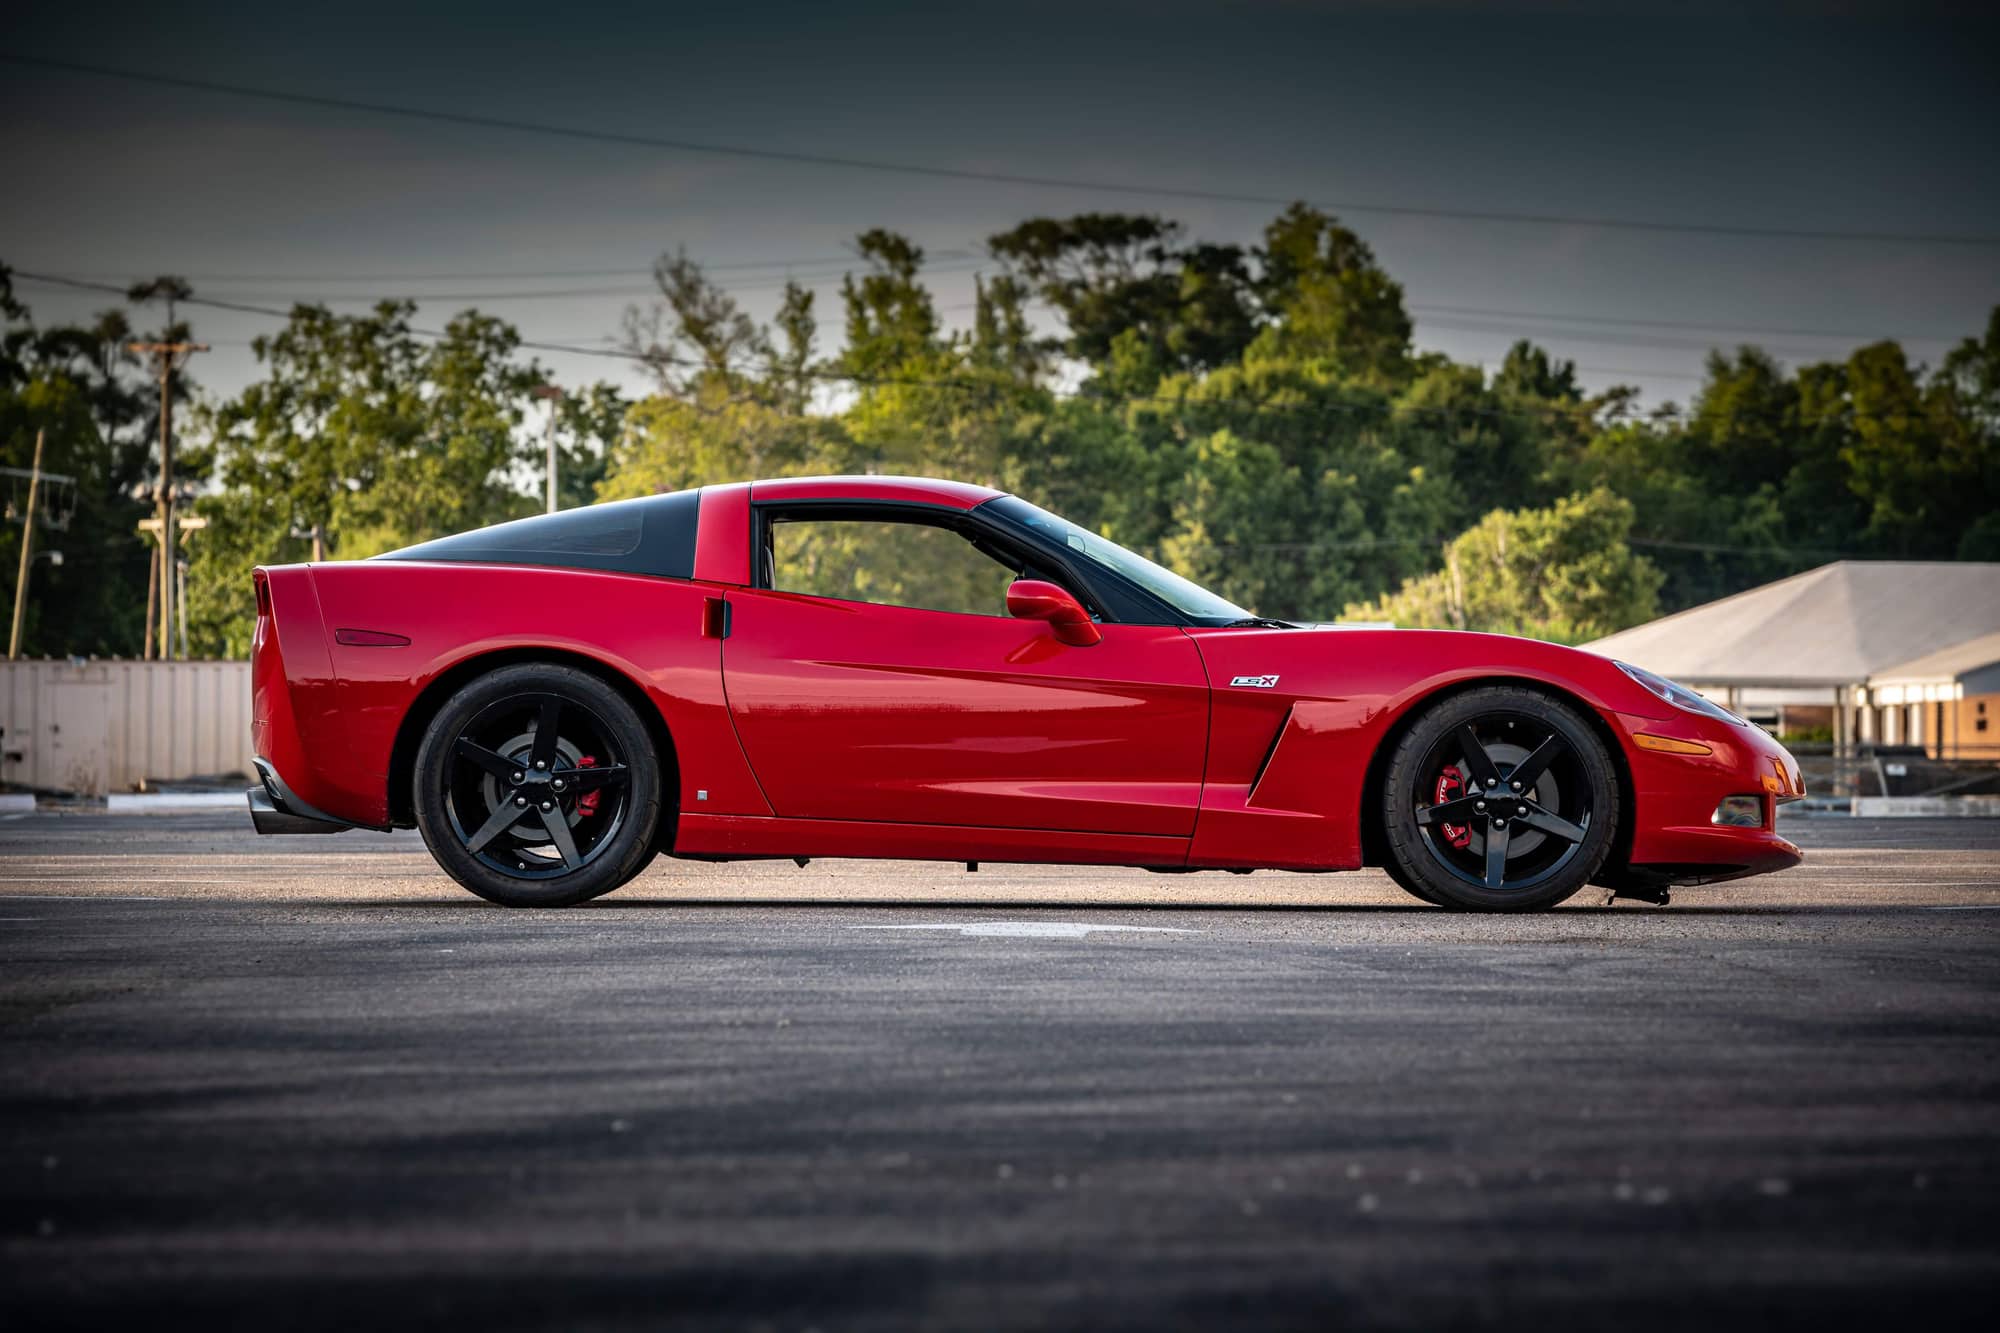 2008 Chevrolet Corvette - FS: 2008 Corvette BASE MT Supercharged/Built Engine 15k Miles - Used - VIN 1G1YY26W885127850 - 15,517 Miles - 8 cyl - 2WD - Manual - Coupe - Red - Liberty, TX 77575, United States